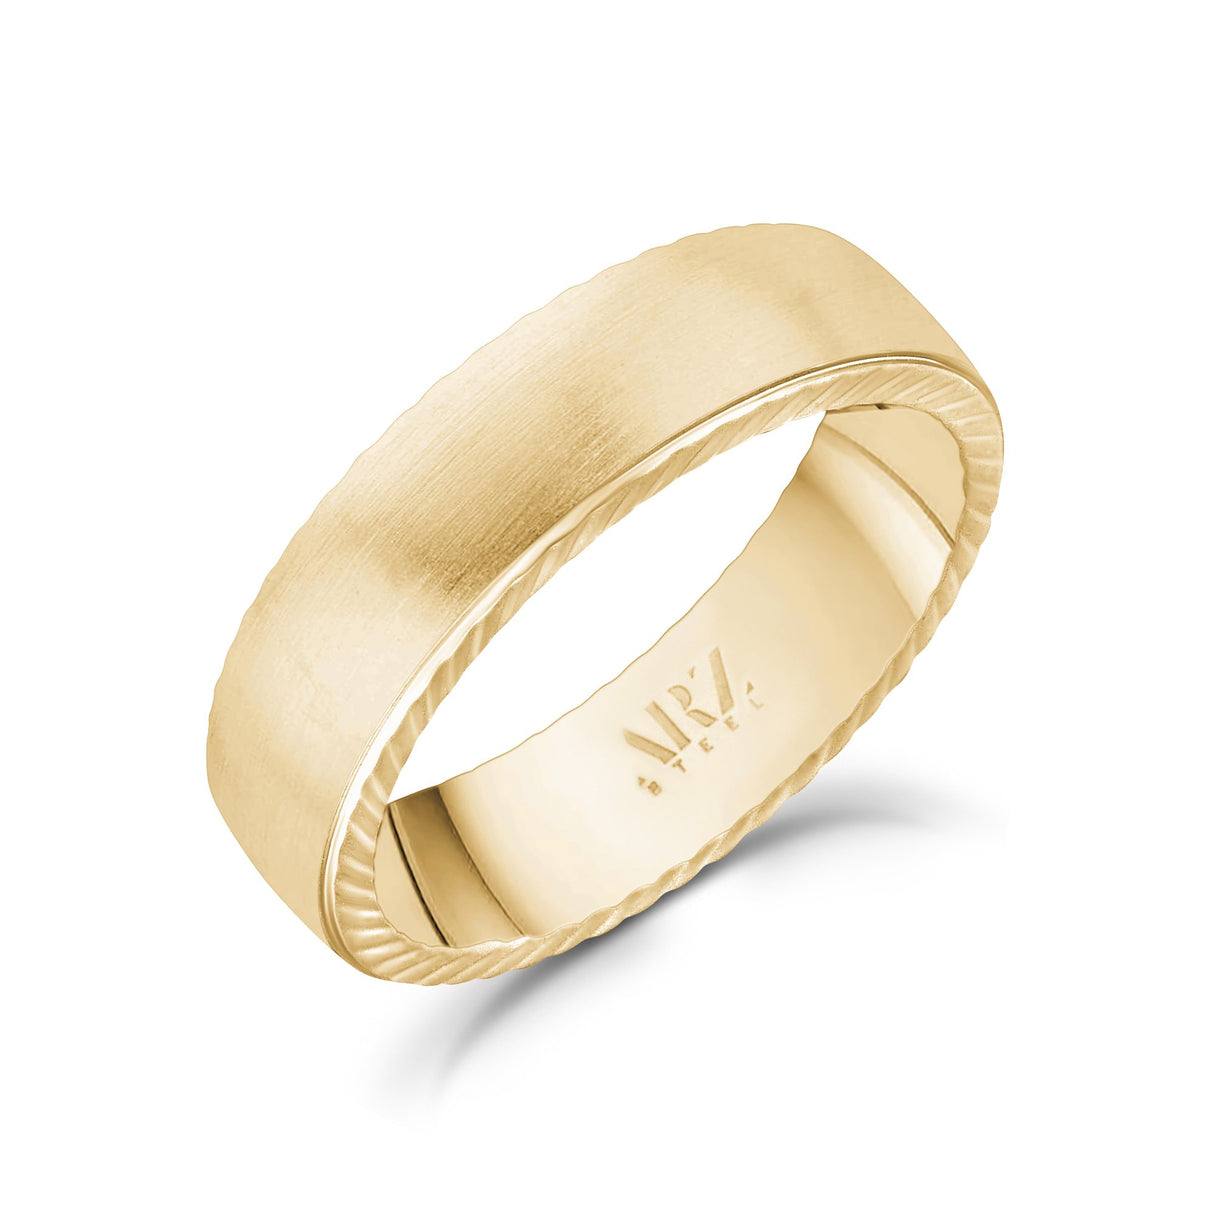 Men Ring - 6mm Matte Flat Gold Stainless Steel Engravable Band Ring